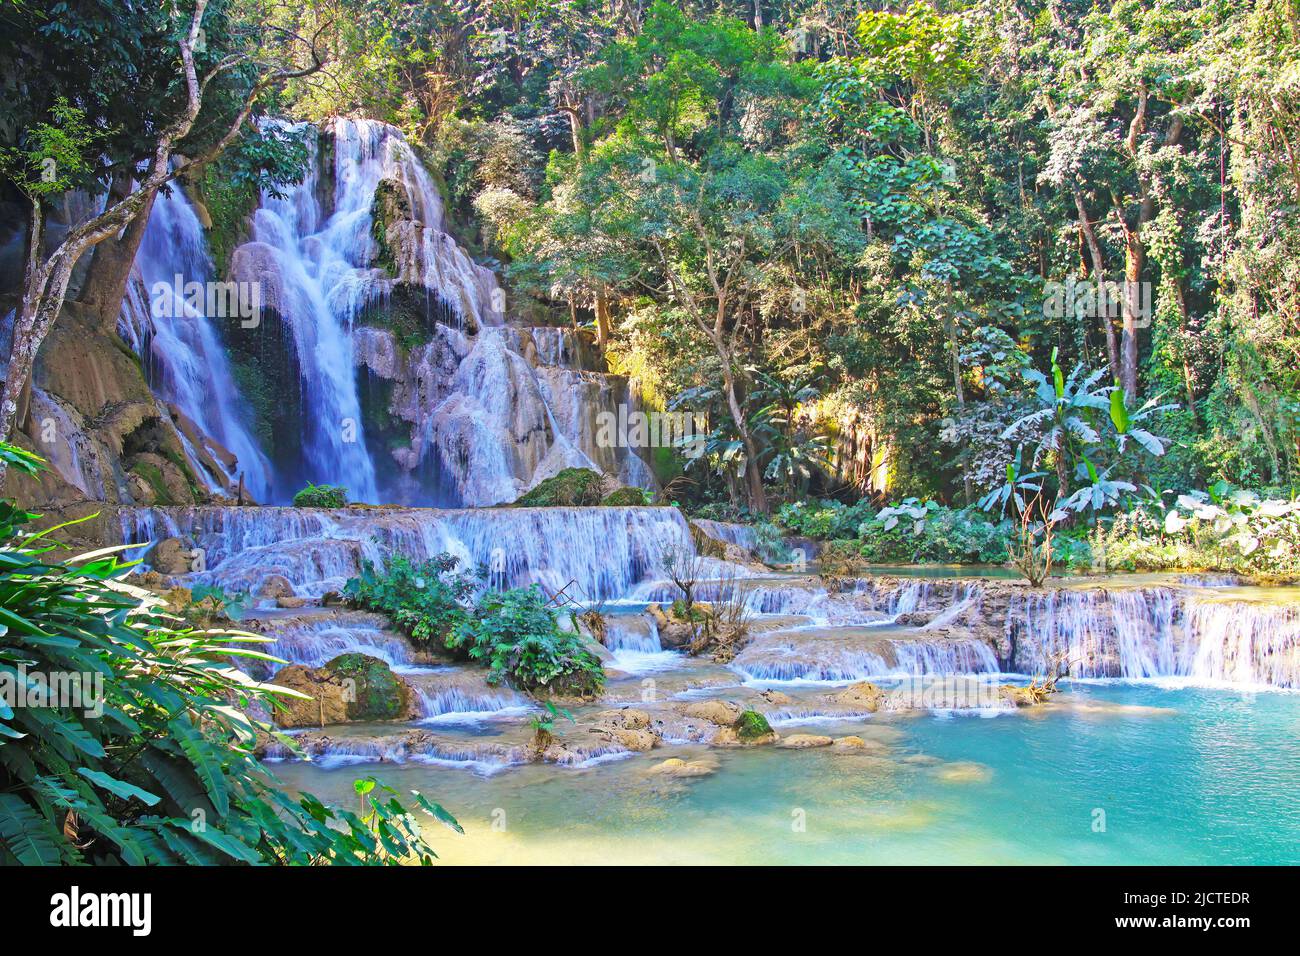 Beautiful secluded idyllic lonely wild jungle forest landscape lagoon, waterfall rock cascade, turquoise natural plunge pool - Kuang Si, Luang Prabang Stock Photo